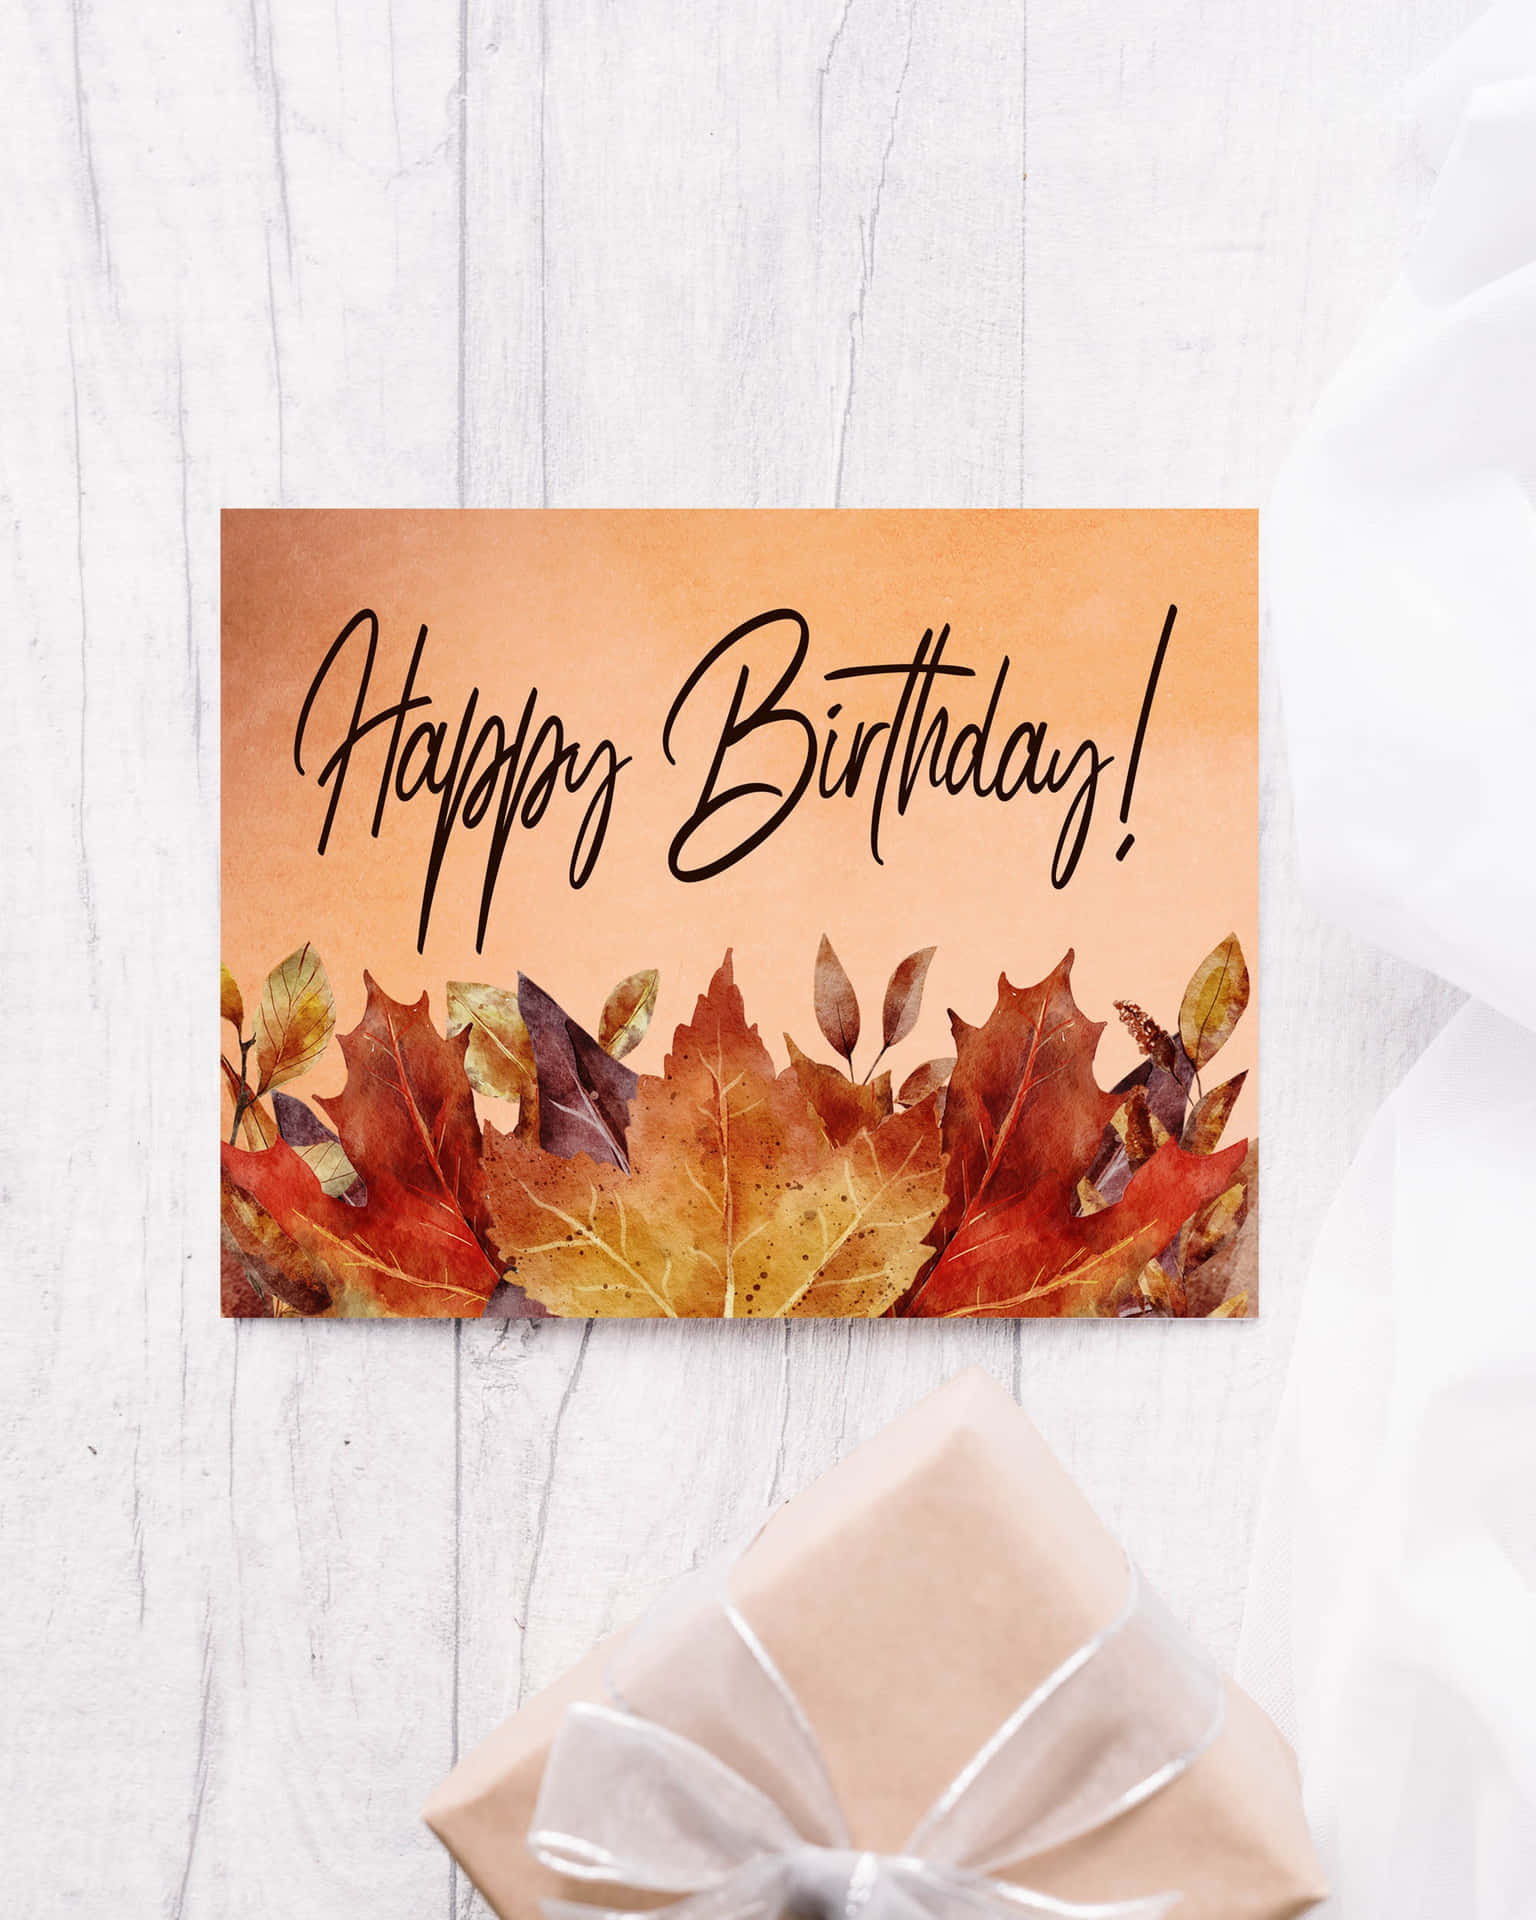 Celebrate the beauty of Fall with an unforgettable Birthday Wallpaper